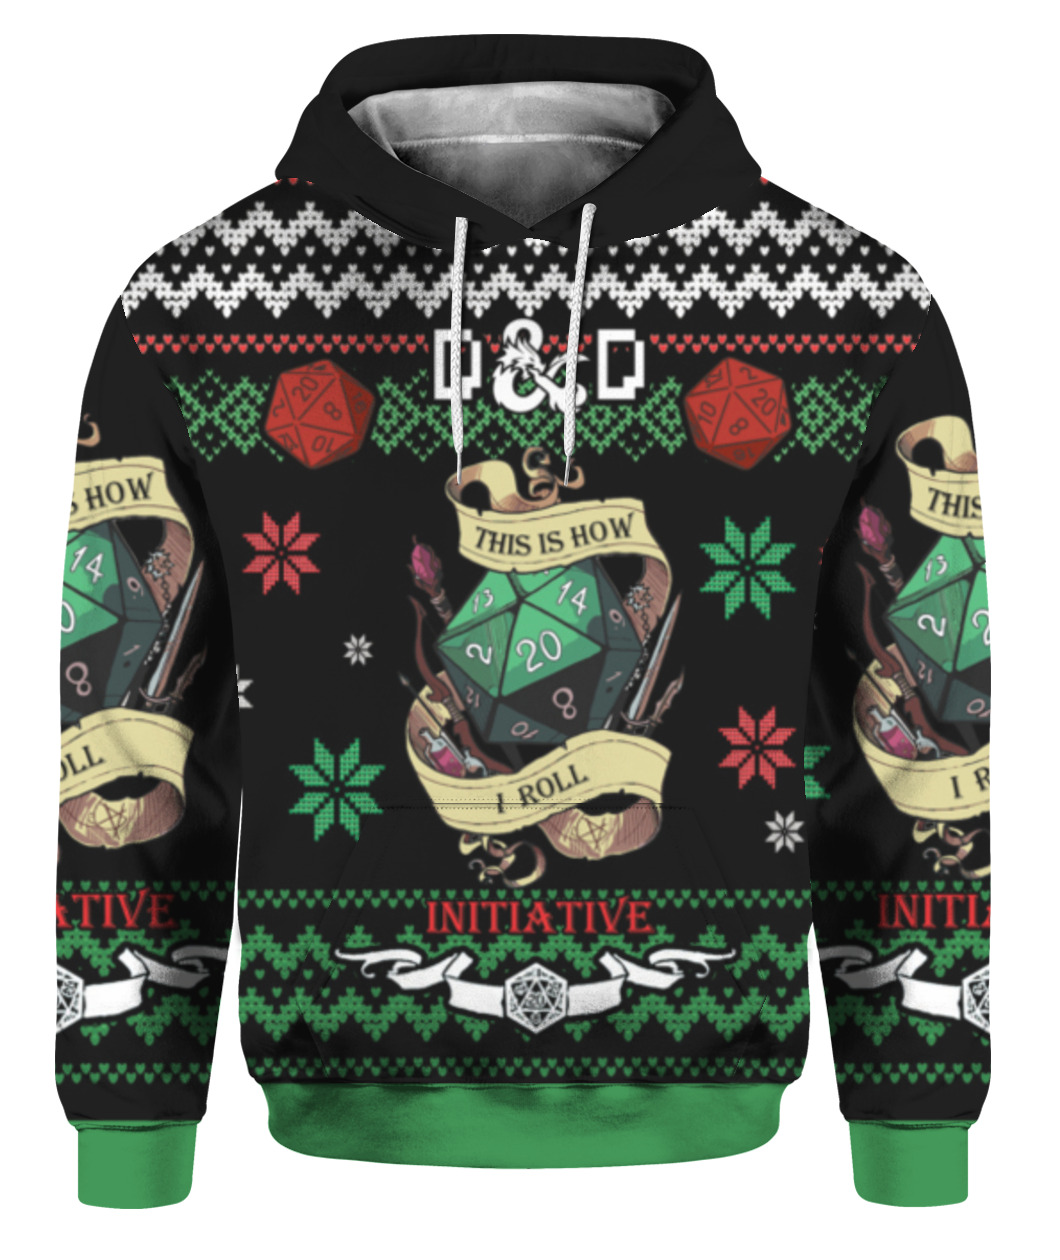 Endastore Los Angeles Dodgers Ugly Christmas Sweater